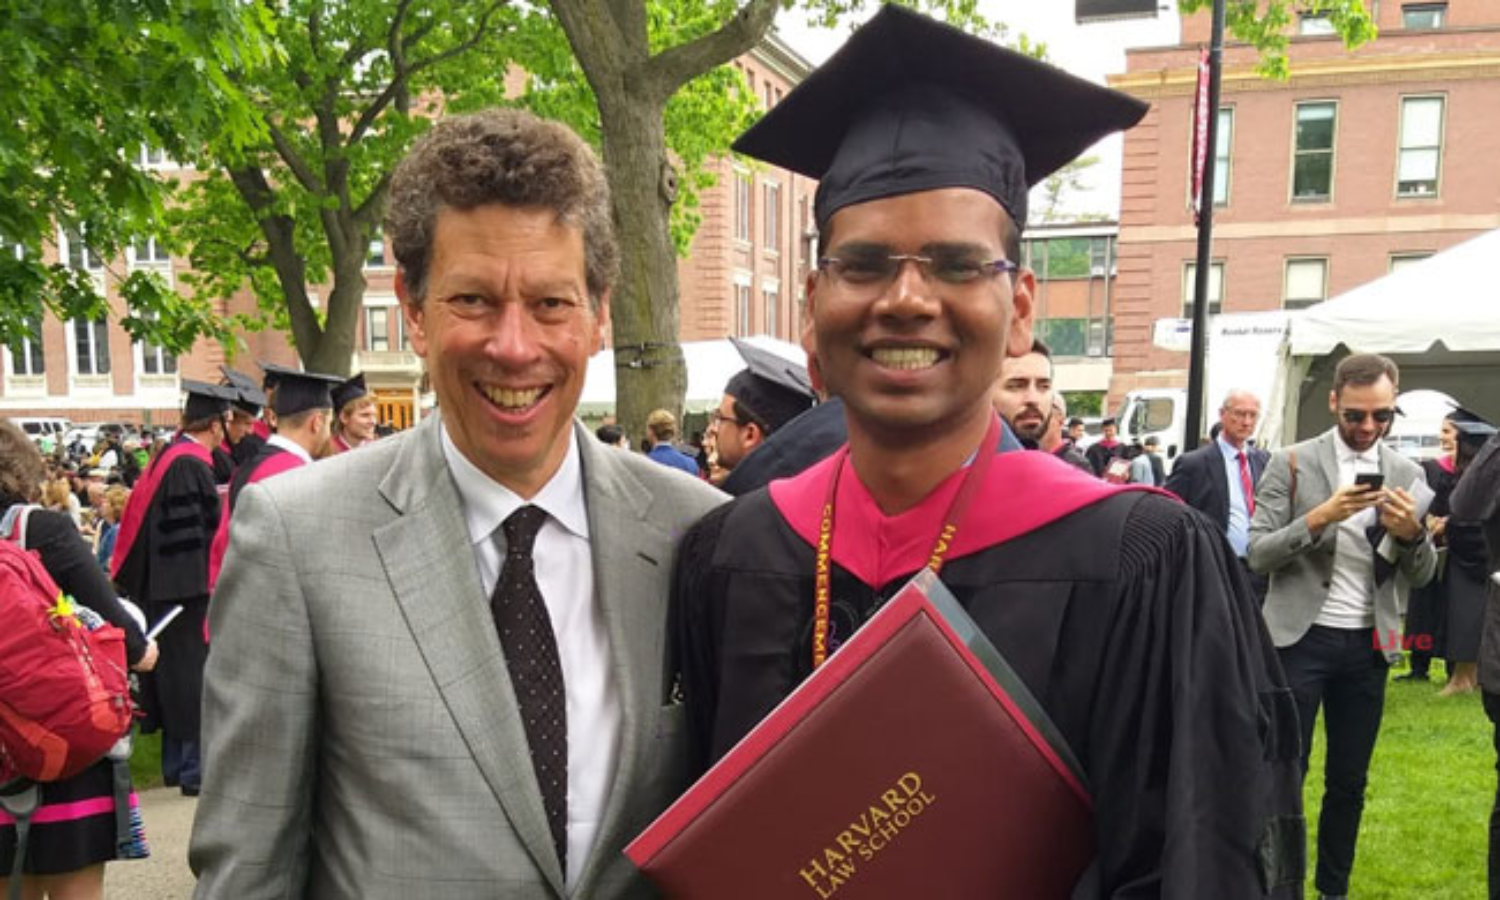 A new Harvard graduate contemplates second-guessing and seeking one's  passion